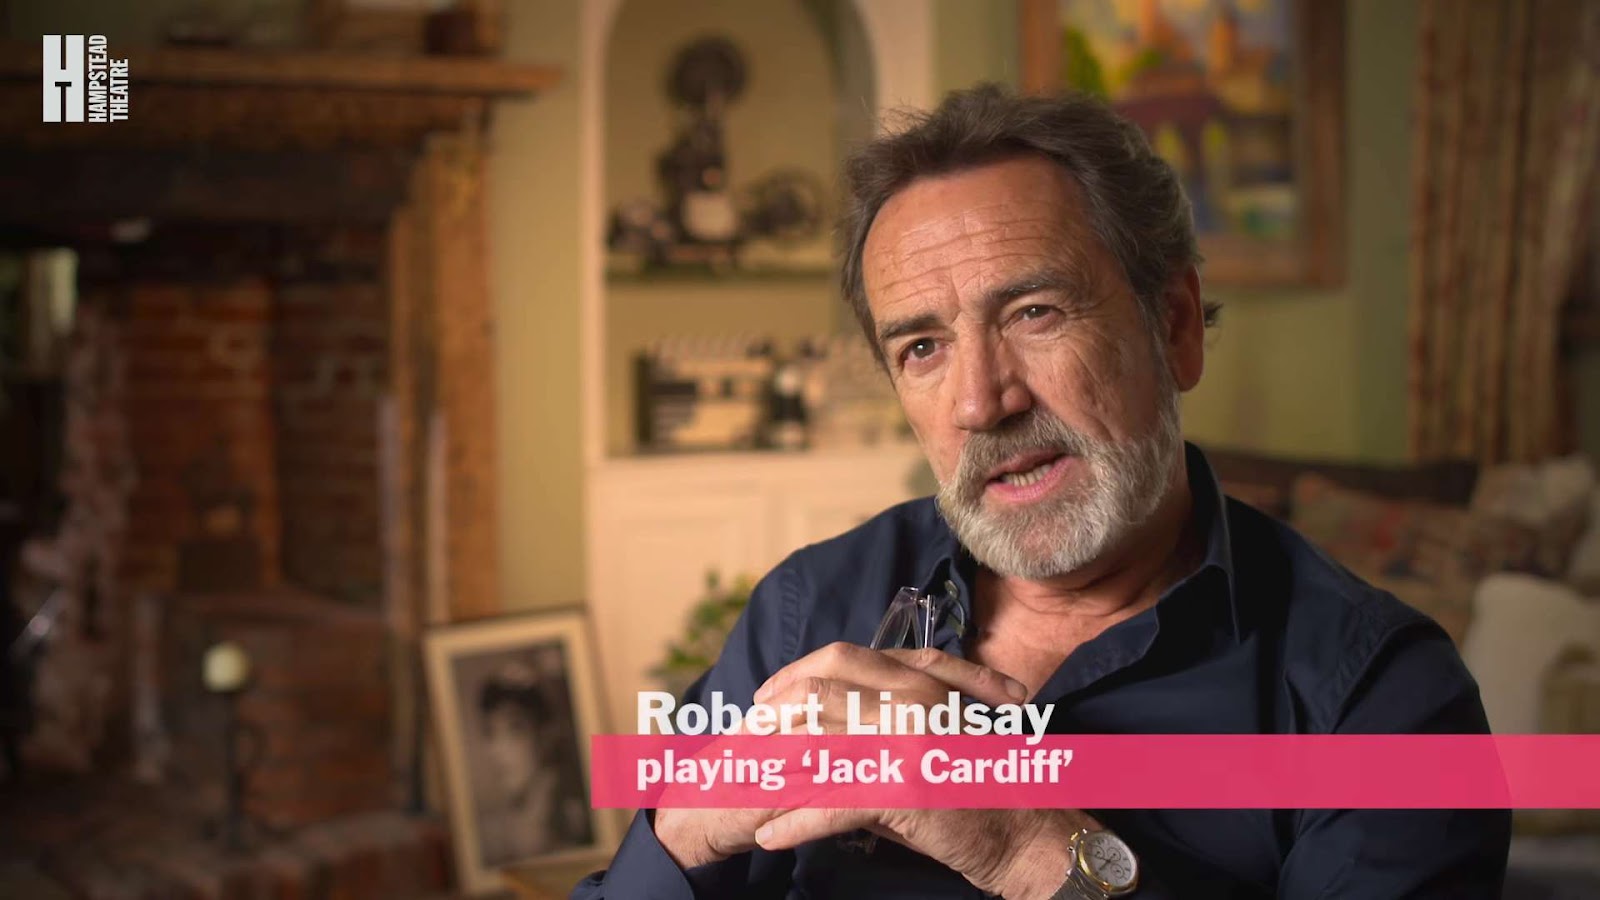 Main actor Robert Lindsay that playing Jack Cardiff in "Prism"